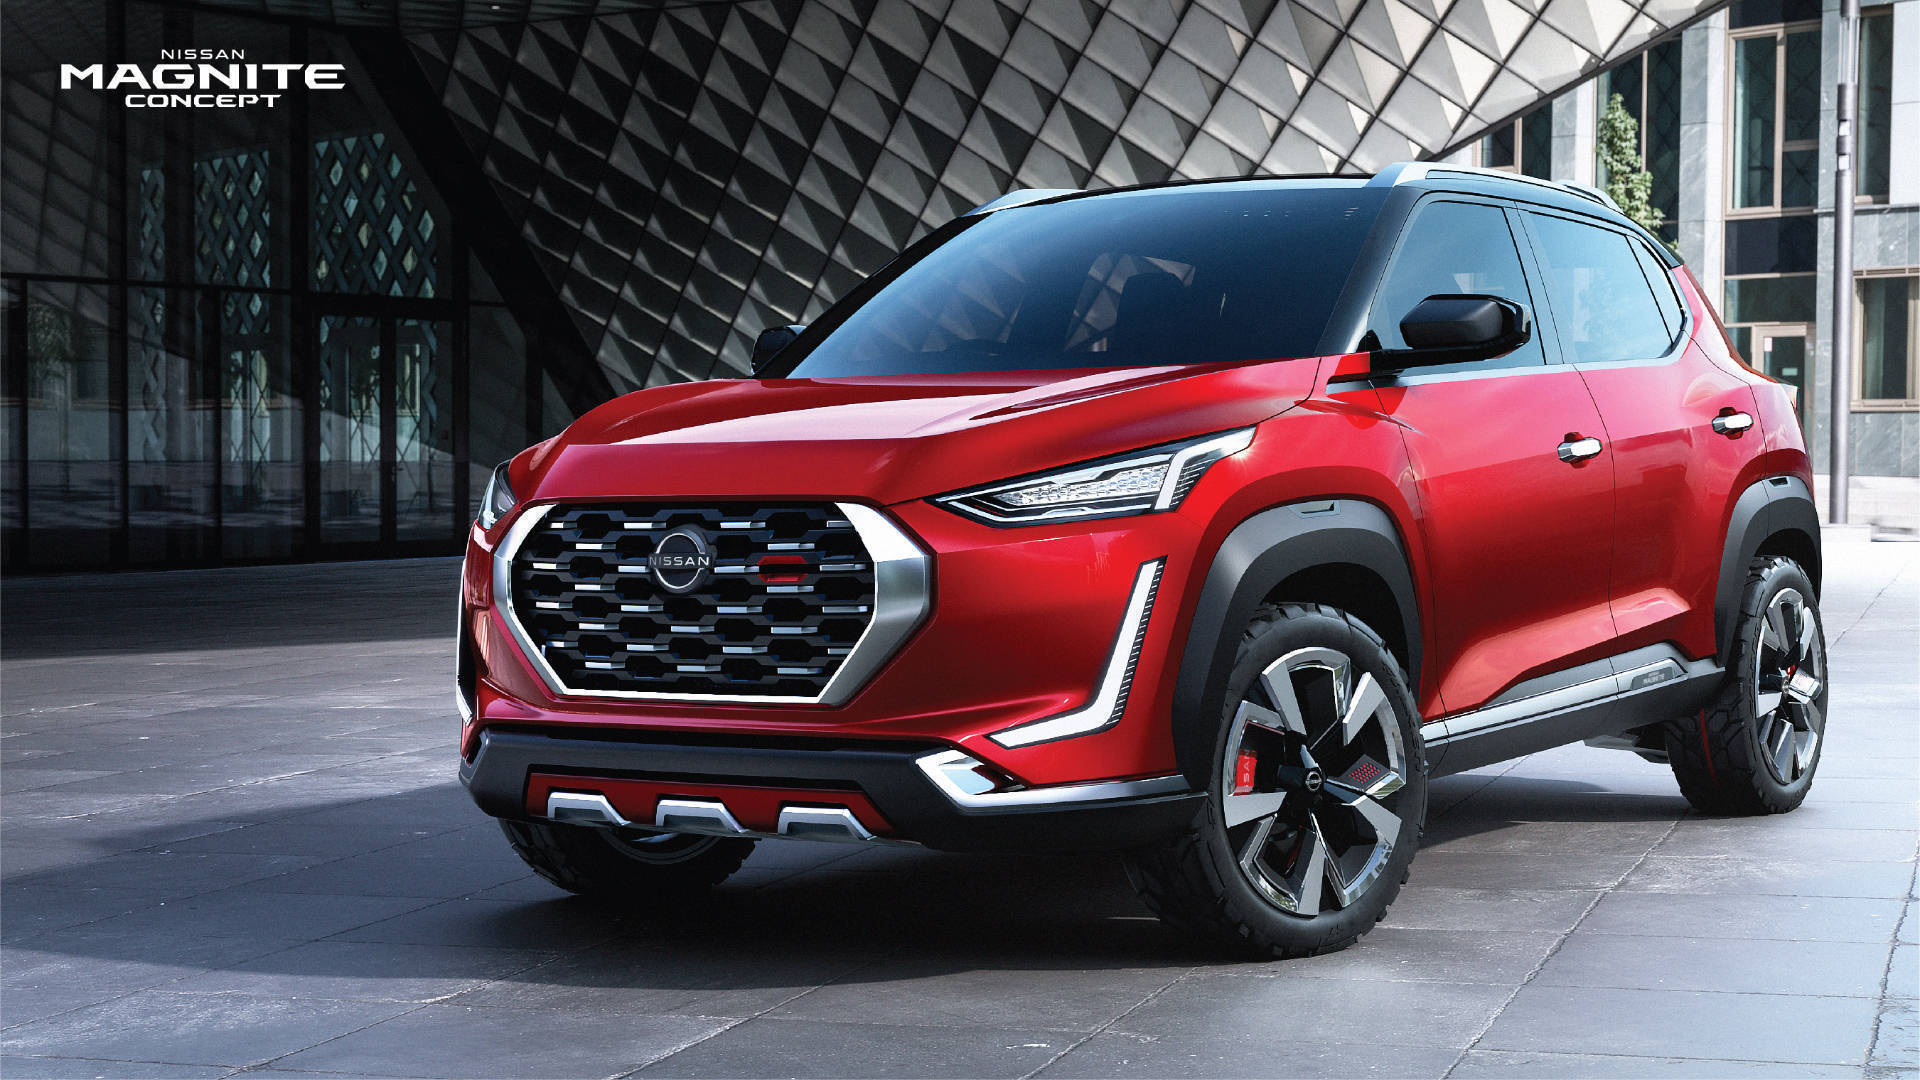 <p>Headlined by bold, aggressive styling the Magnite&nbsp;goes beyond what its relatively humble CMF-A+ underpinnings would lead one to expect.&nbsp;</p>